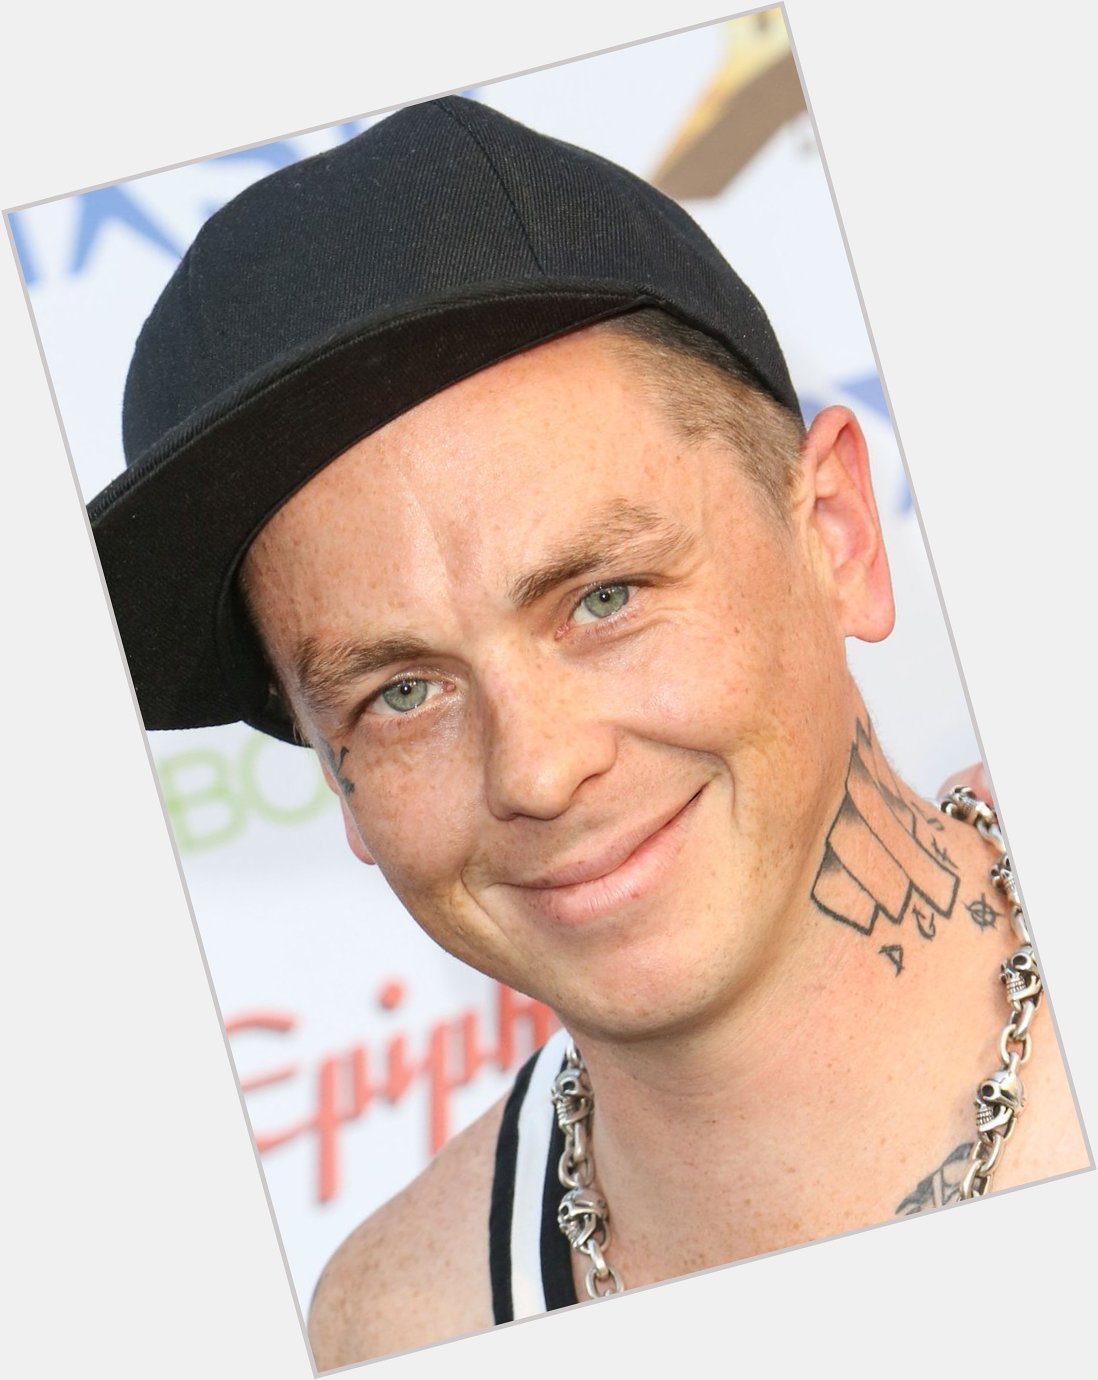 Please join me here at in wishing the one and only Sid Wilson a very Happy 44th Birthday today  